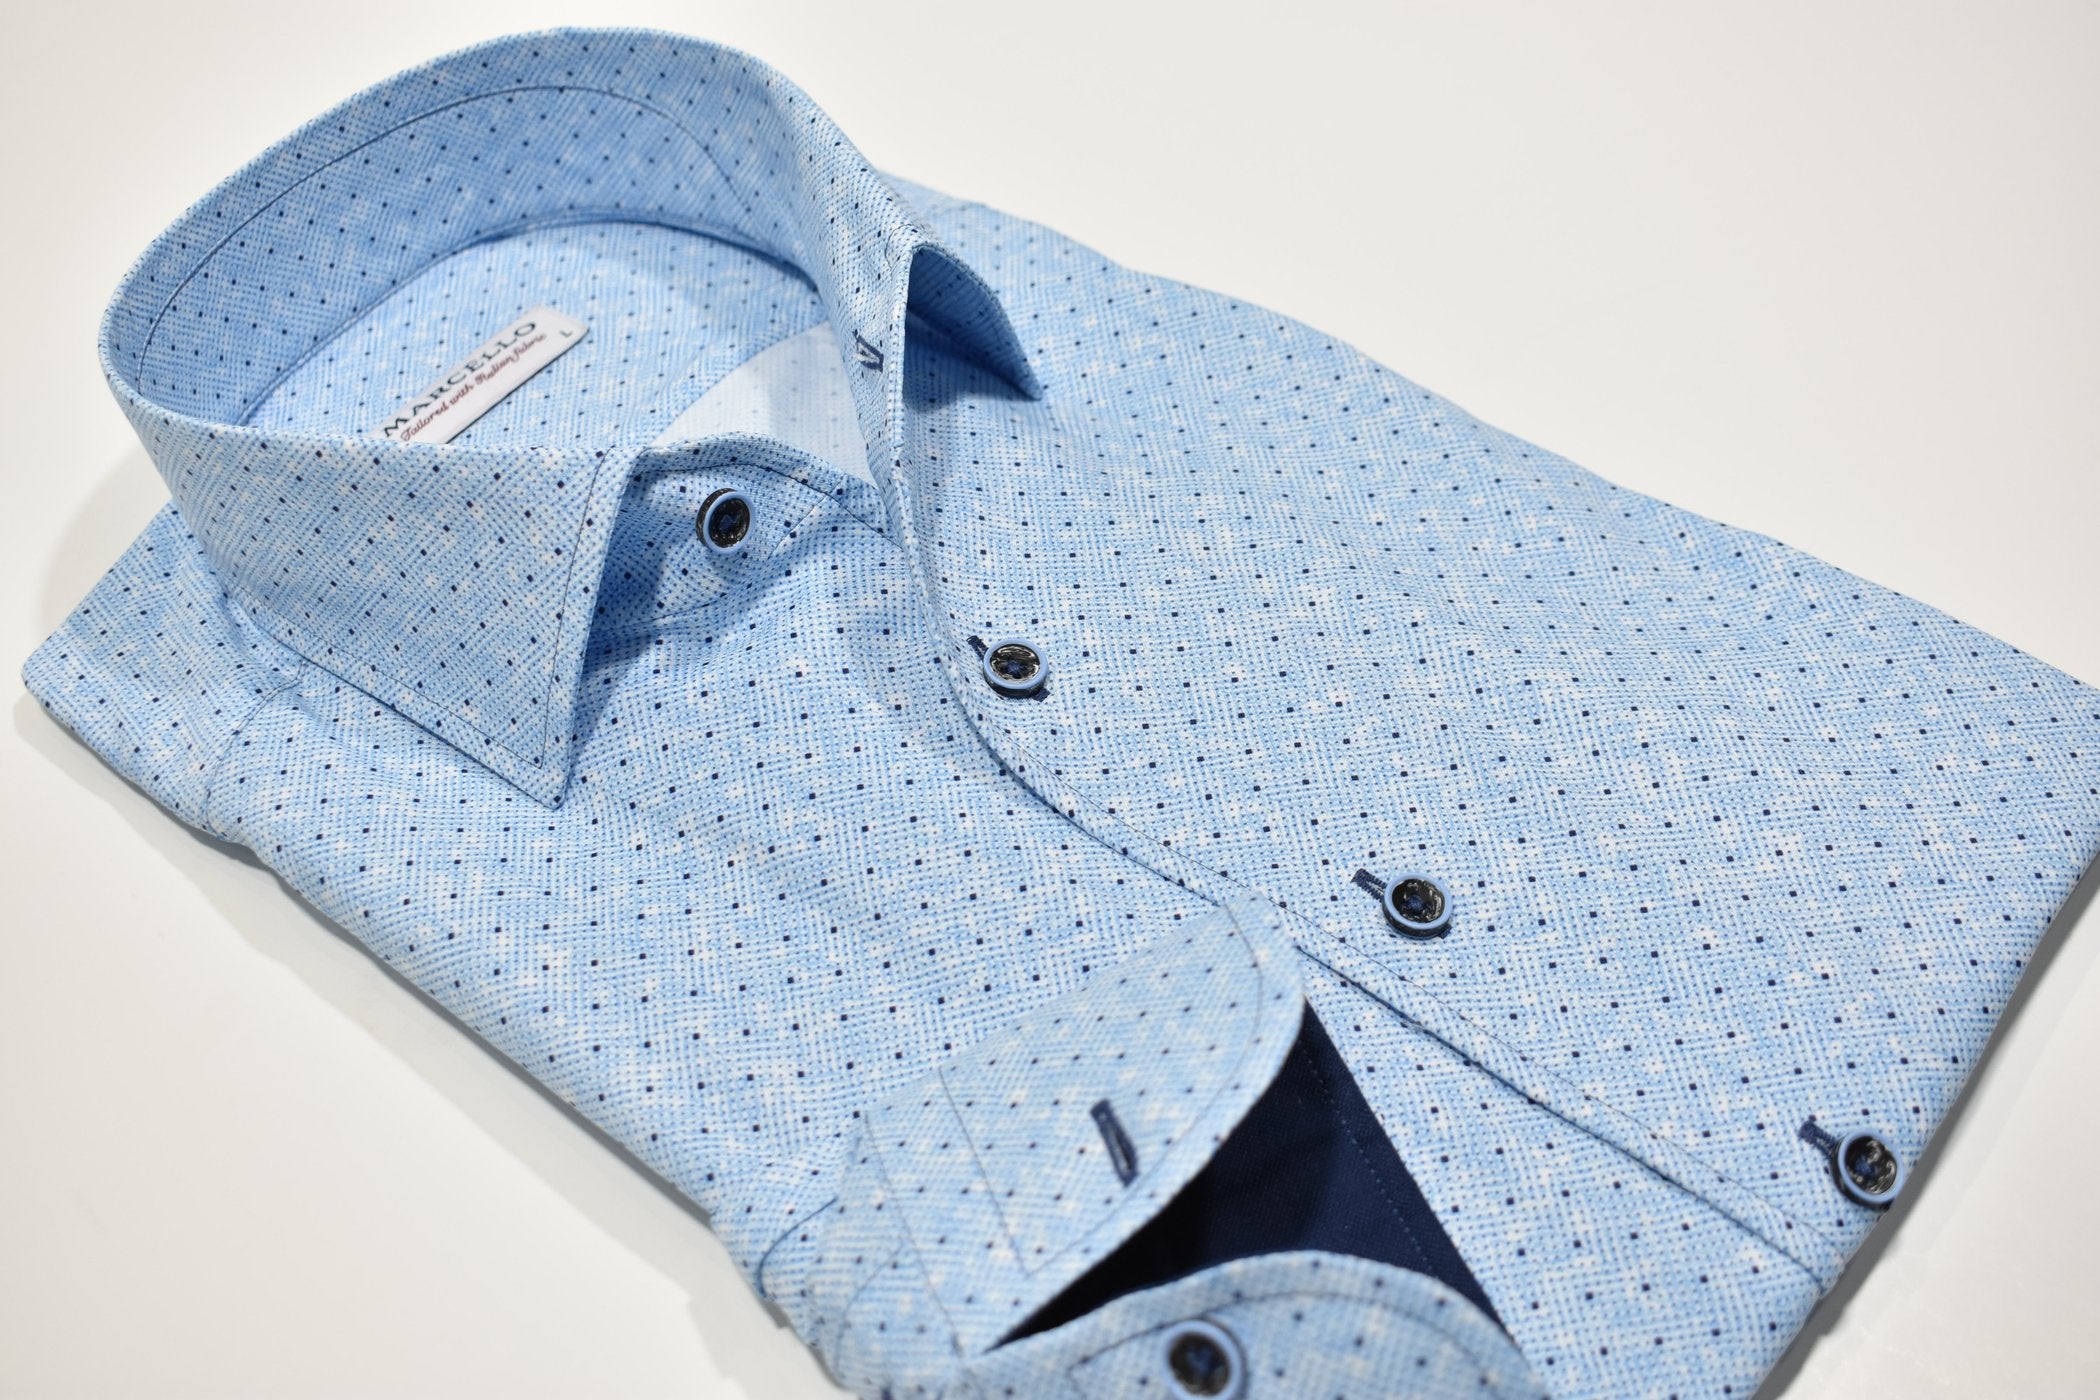 Elevate your style with the W932R Sky Dot Roll Collar. Featuring a Marcello exclusive one piece roll collar, this medium blue patterned herringbone shirt is accented with random navy dots. Exude confidence and sophistication with this must-have piece. By Marcello